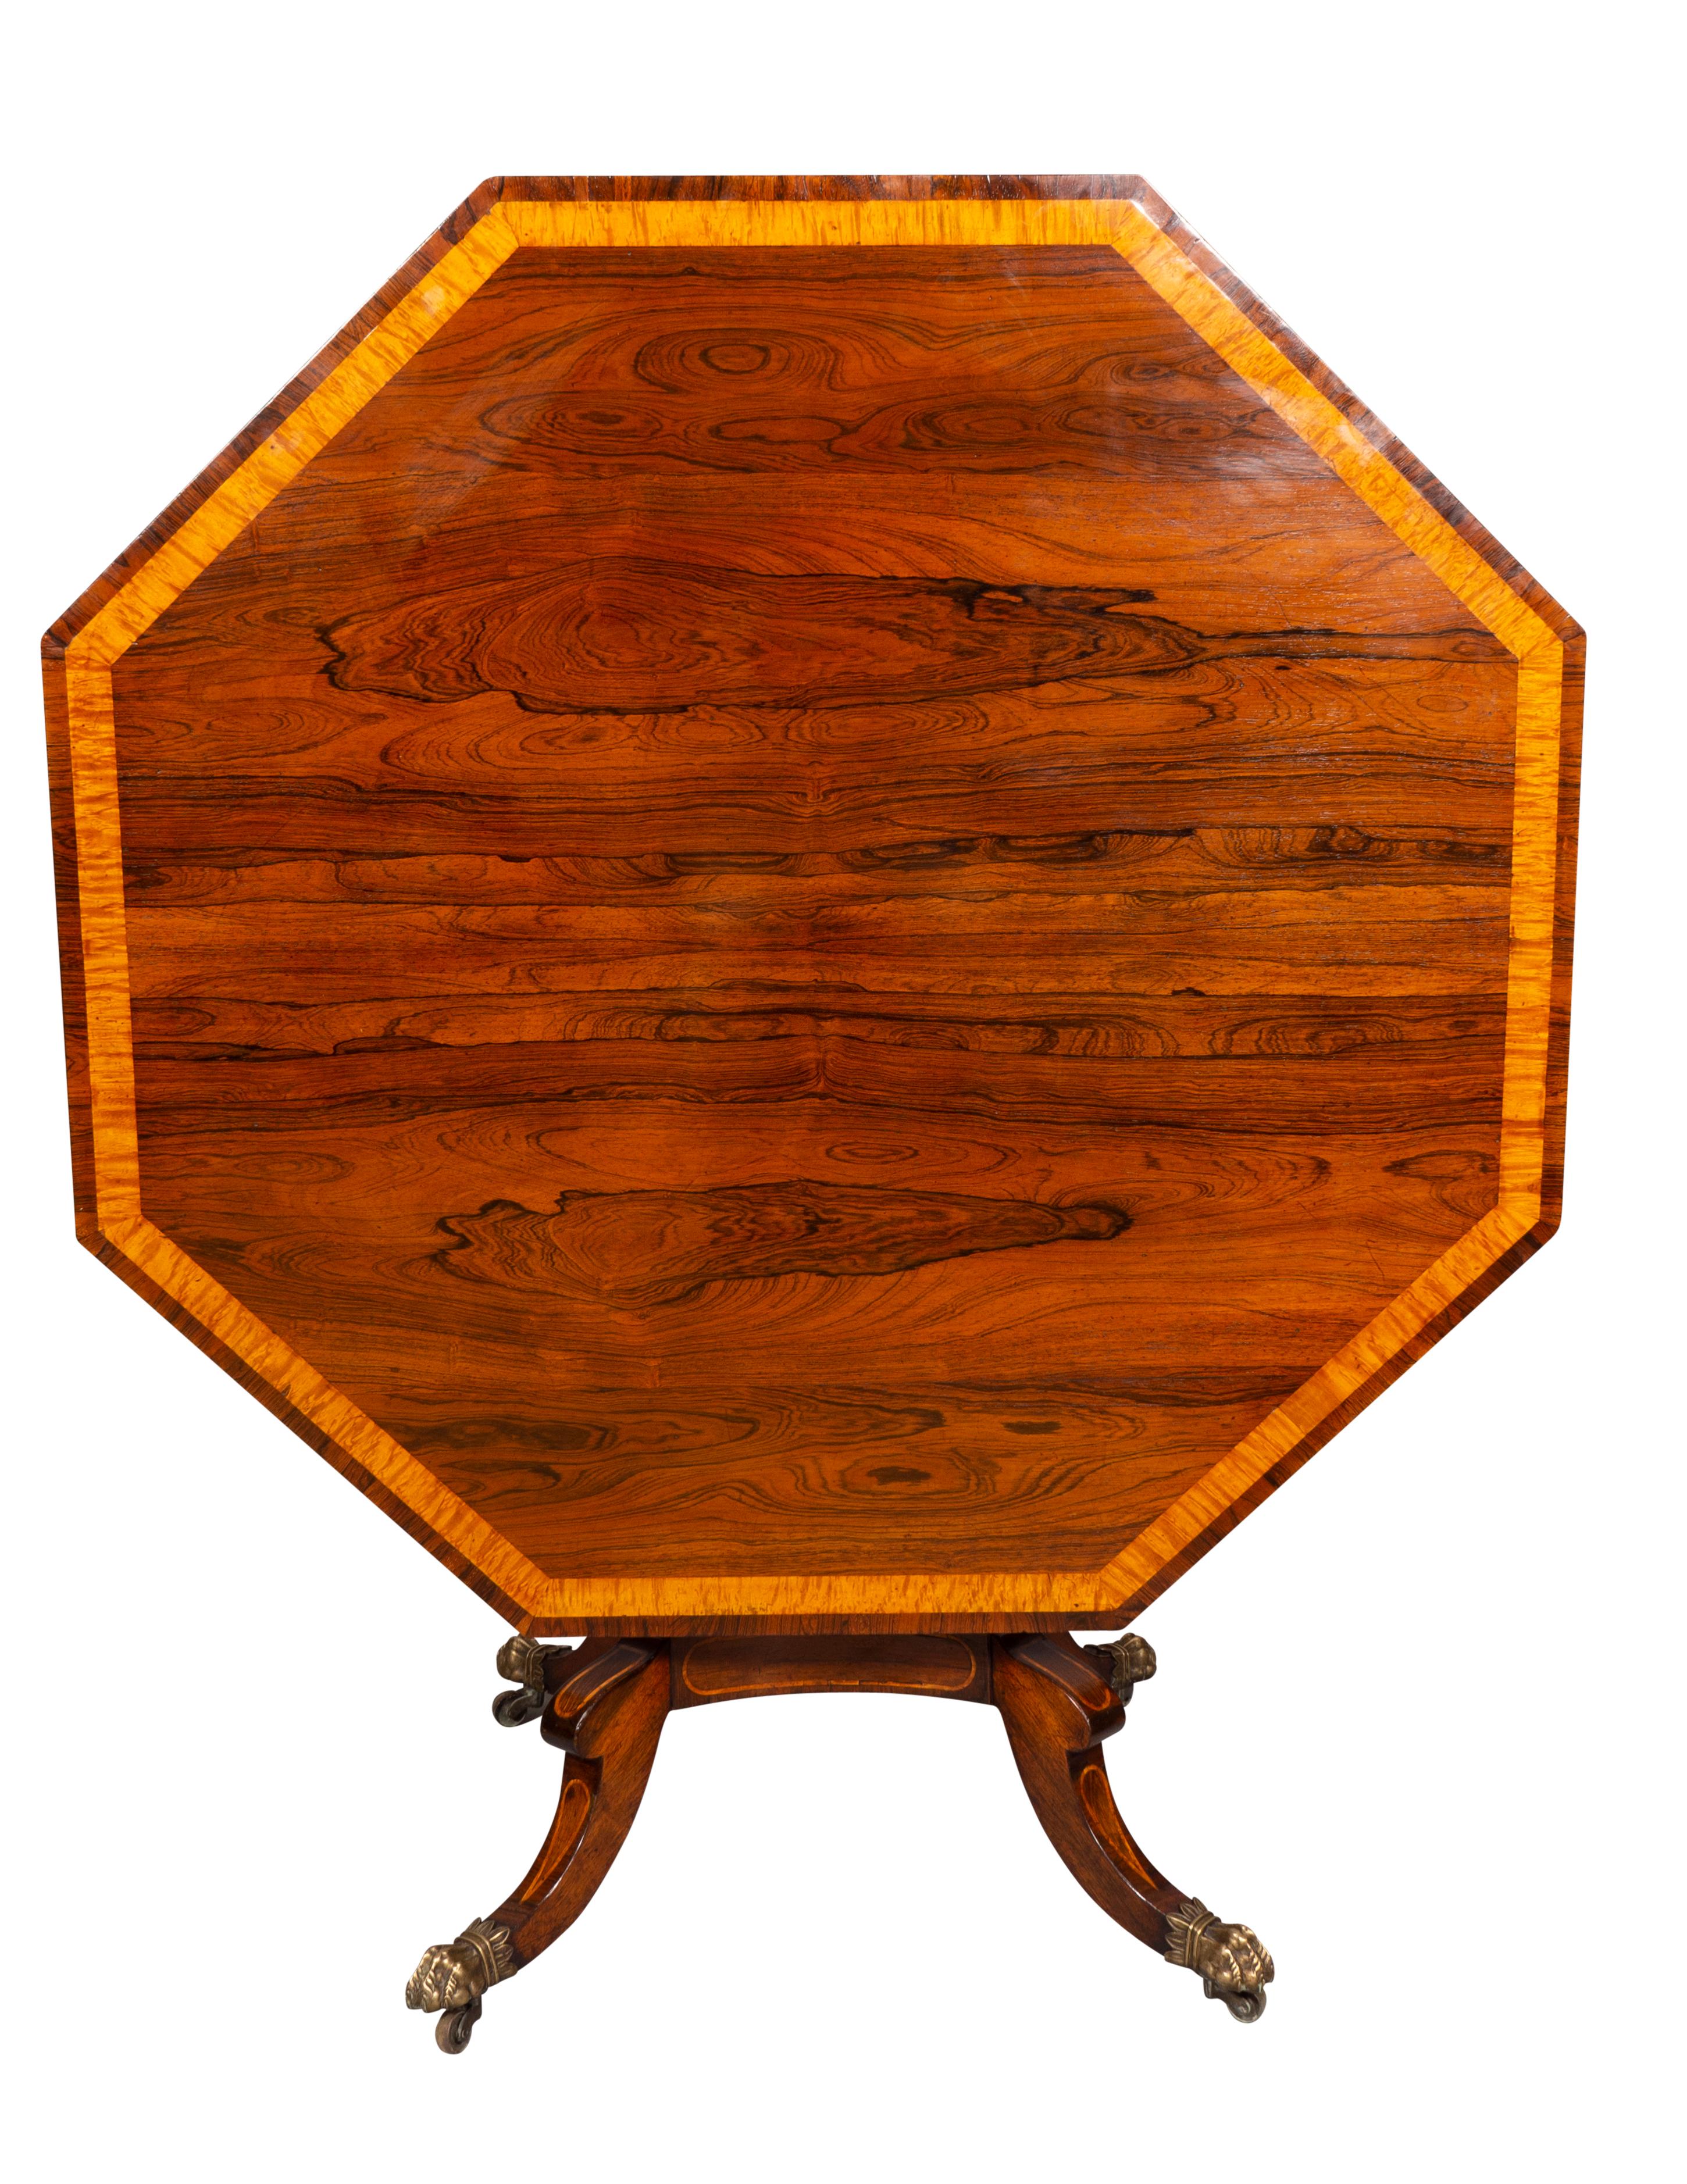 Early 19th Century Regency Rosewood And Satinwood Banded Center Table